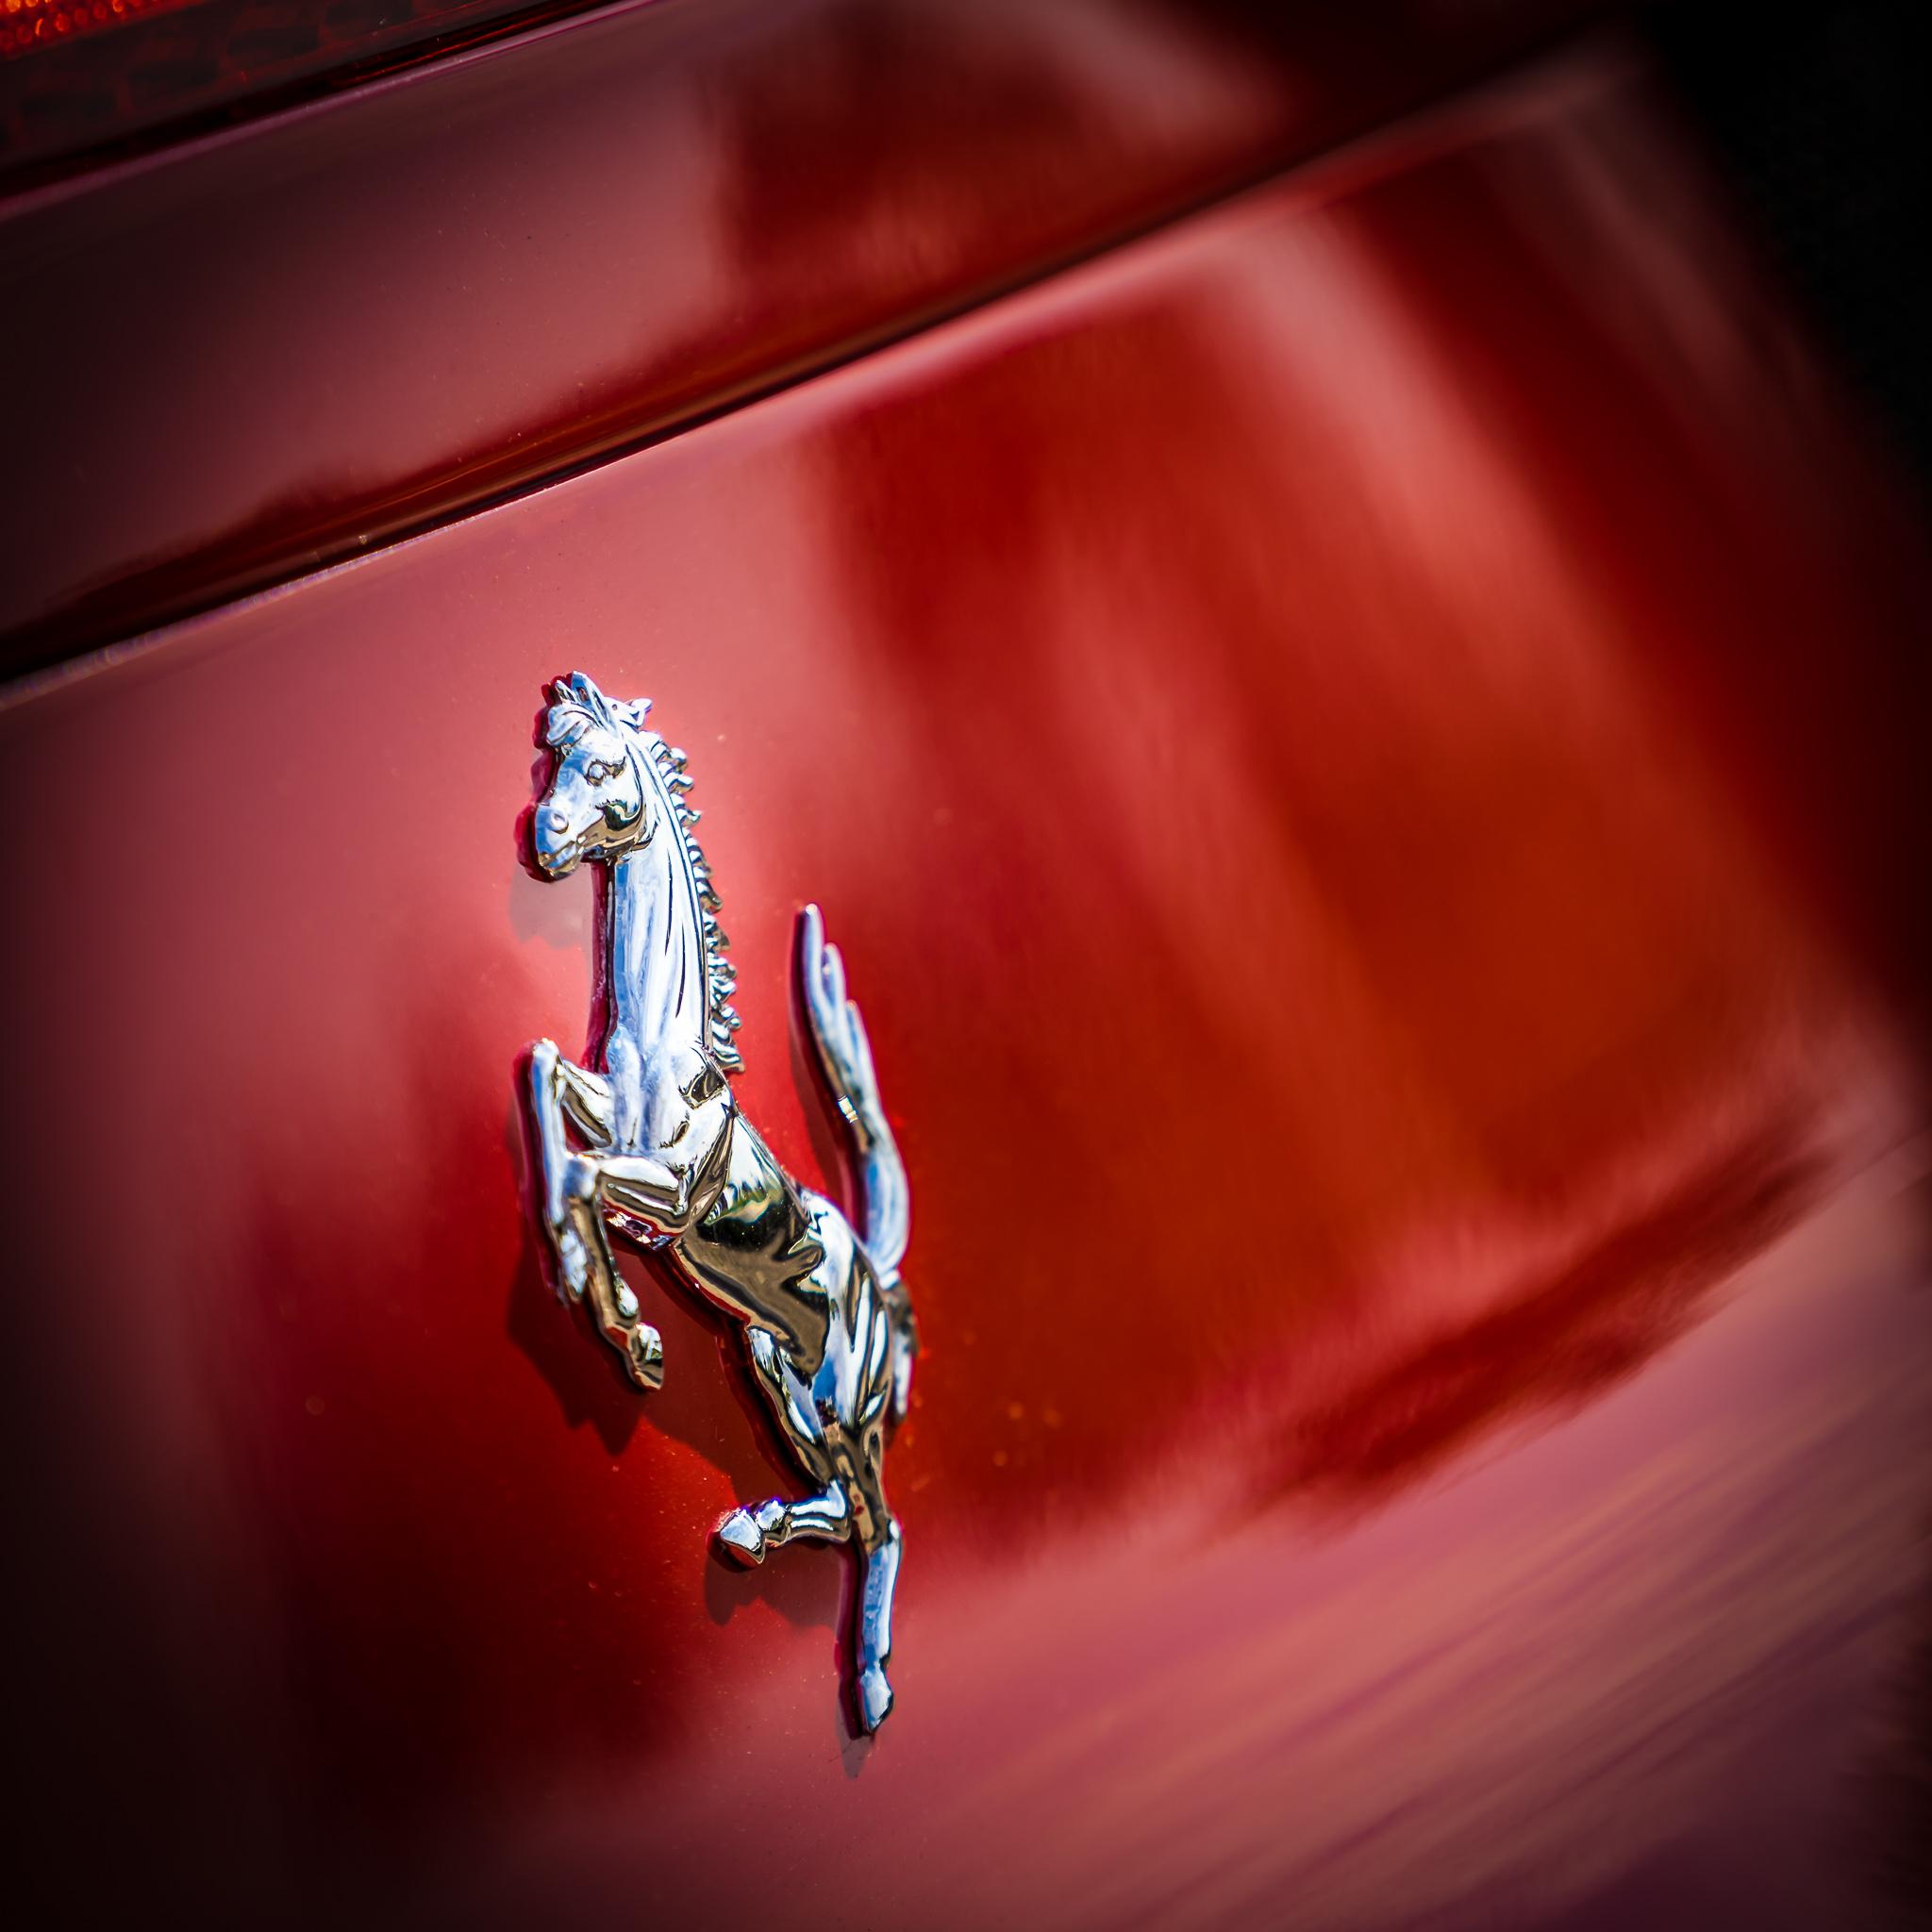 Red Ferrari Horse Logo - Picture of the Week: Ferrari's Prancing Horse. Andy's Travel Blog